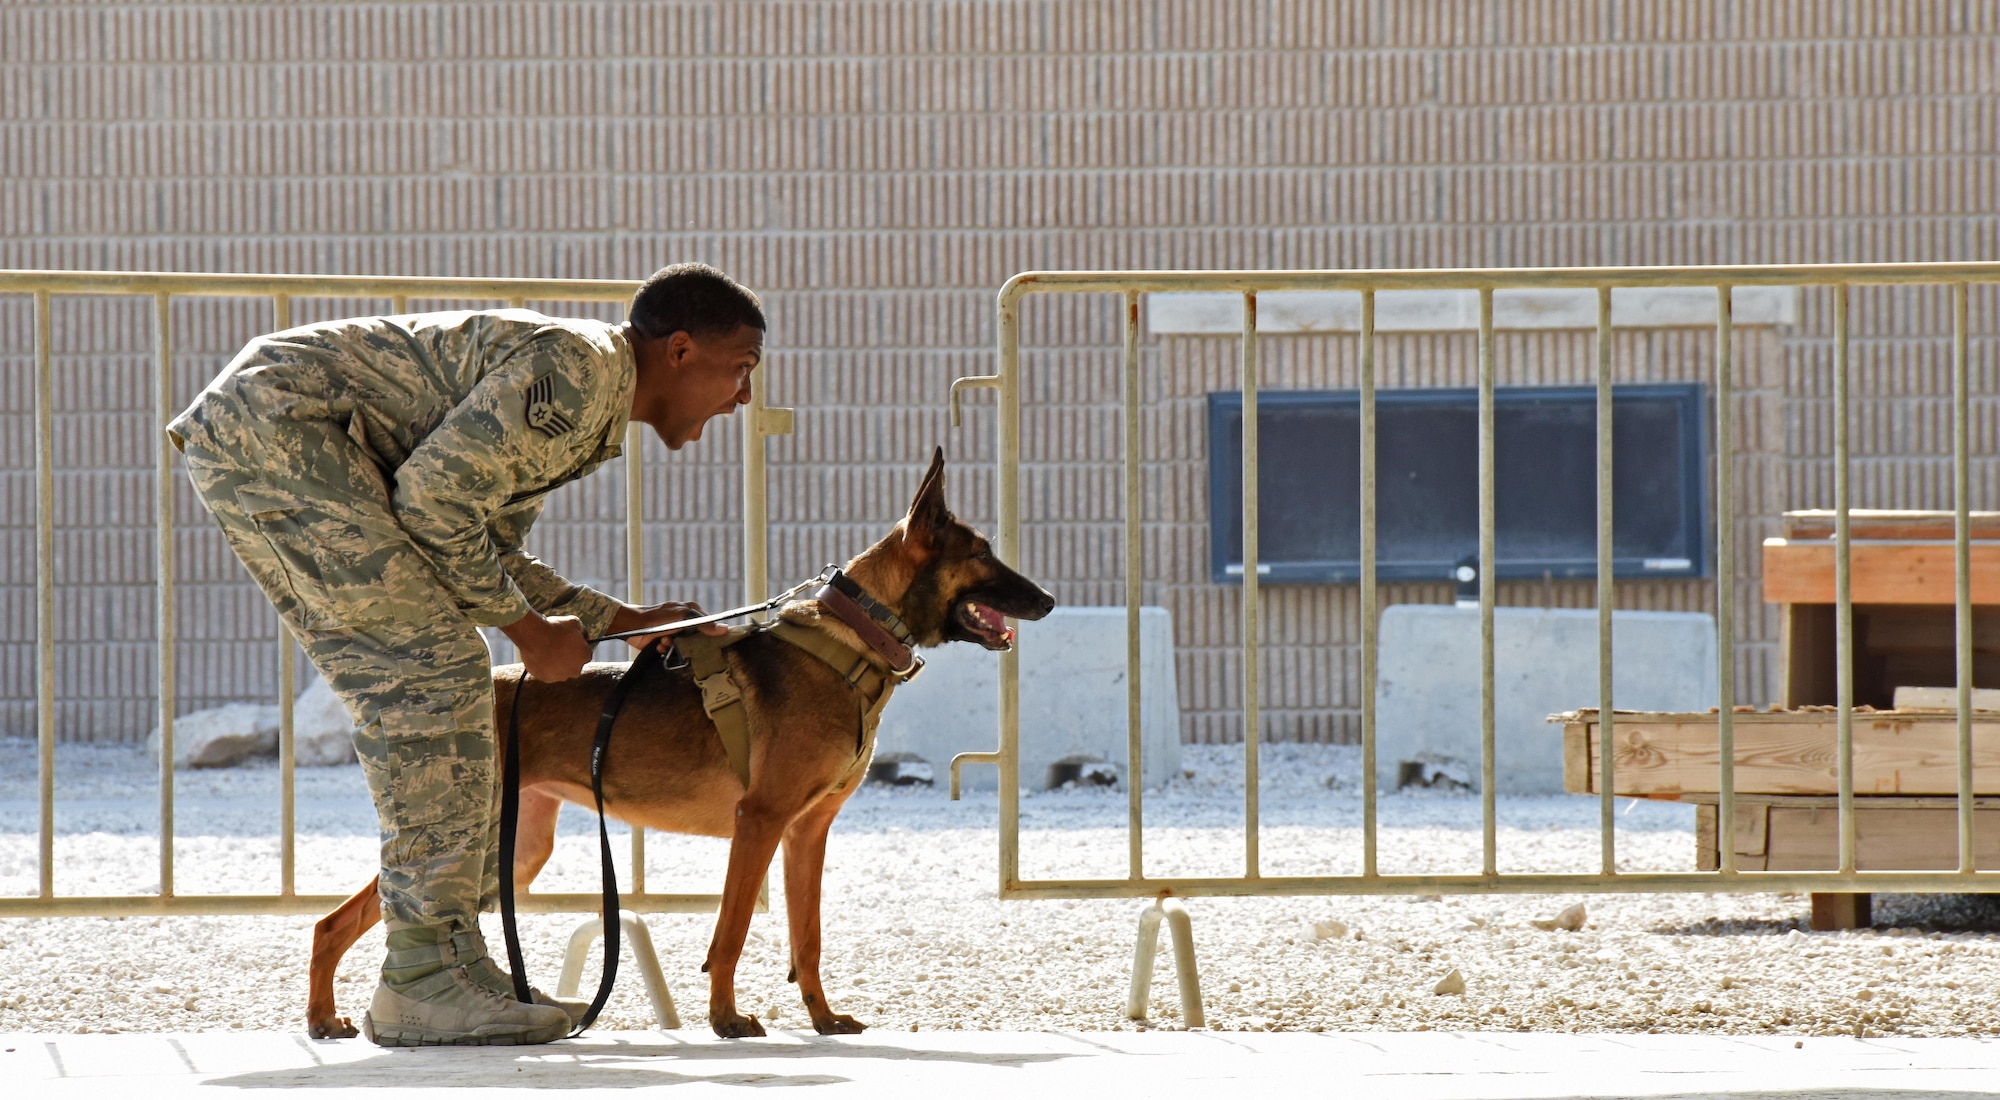 U.S. Air Force Staff Sgt. Mathis Williams, a dog handler with the 379th Security Forces Squadron military working dog section, shouts instructions to an Airman acting as a decoy during a Veterans Day MWD demonstration at Al Udeid Air Base, Qatar, Nov. 11, 2016. The building search demonstration performed here is a common training exercise utilized by MWD Airmen to maintain their canine’s capabilities. (U.S. Air Force photo by Senior Airman Cynthia A. Innocenti)